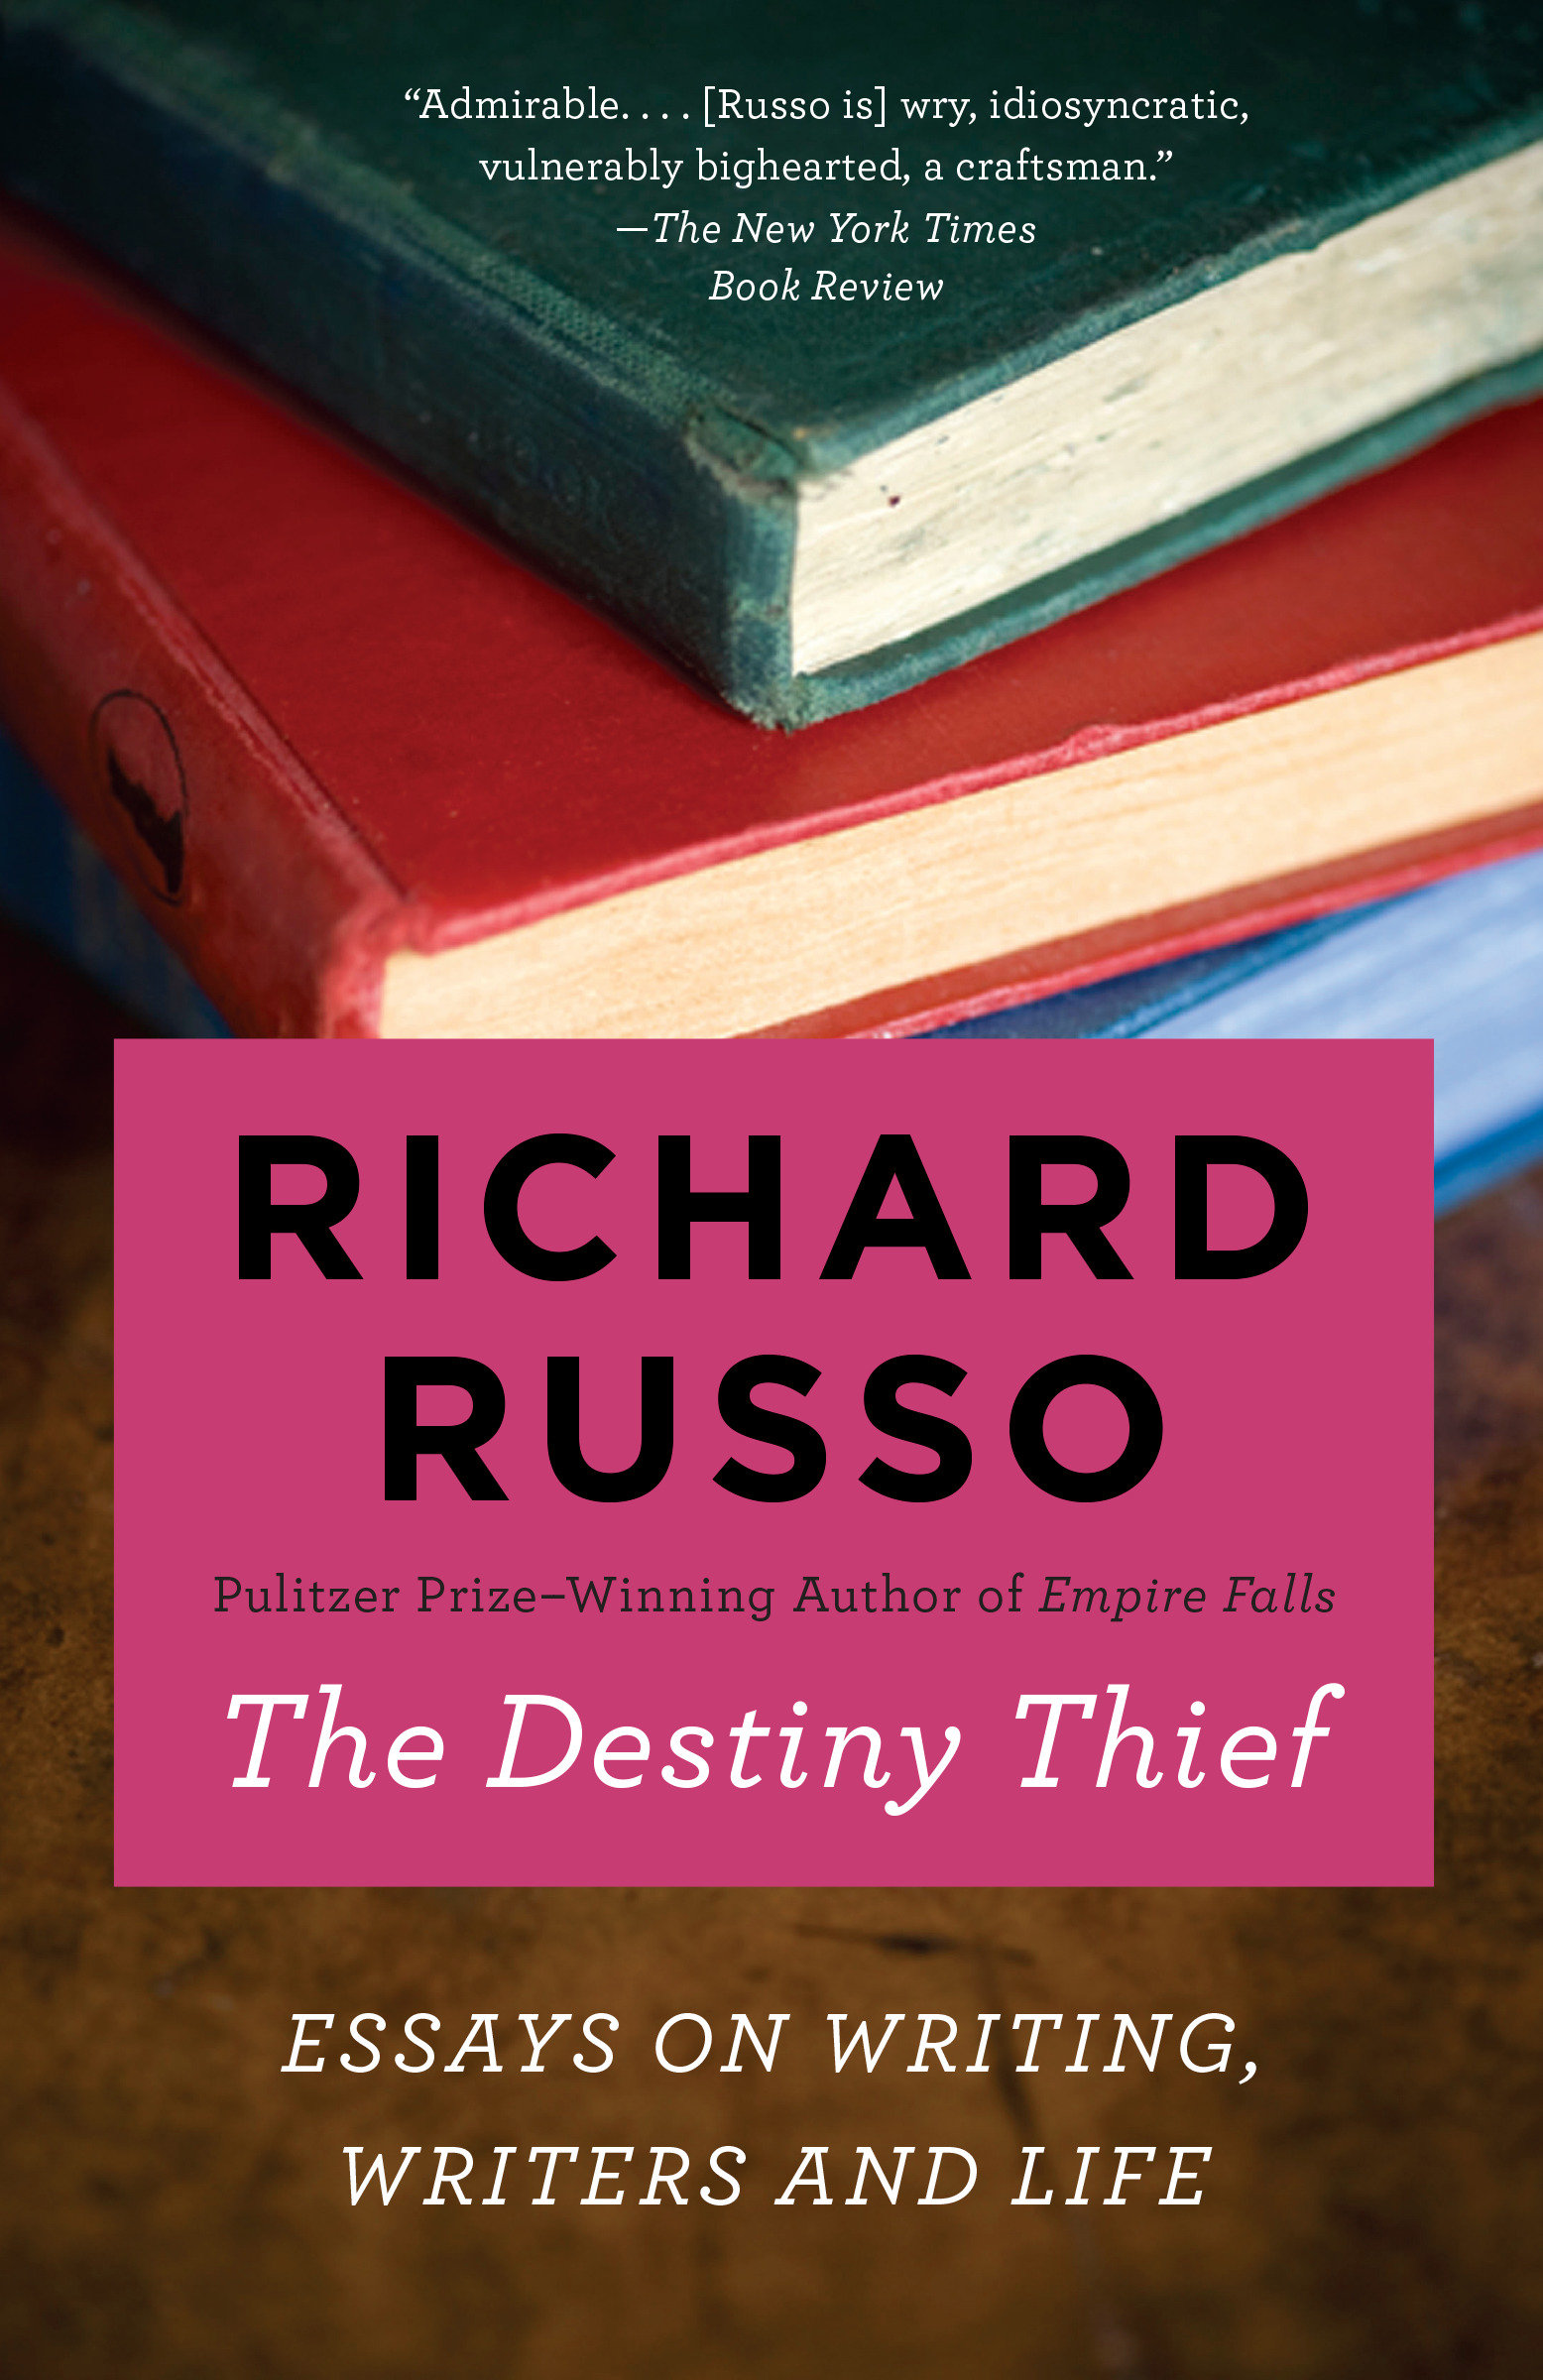 The destiny thief essays on writing, writers, and life cover image